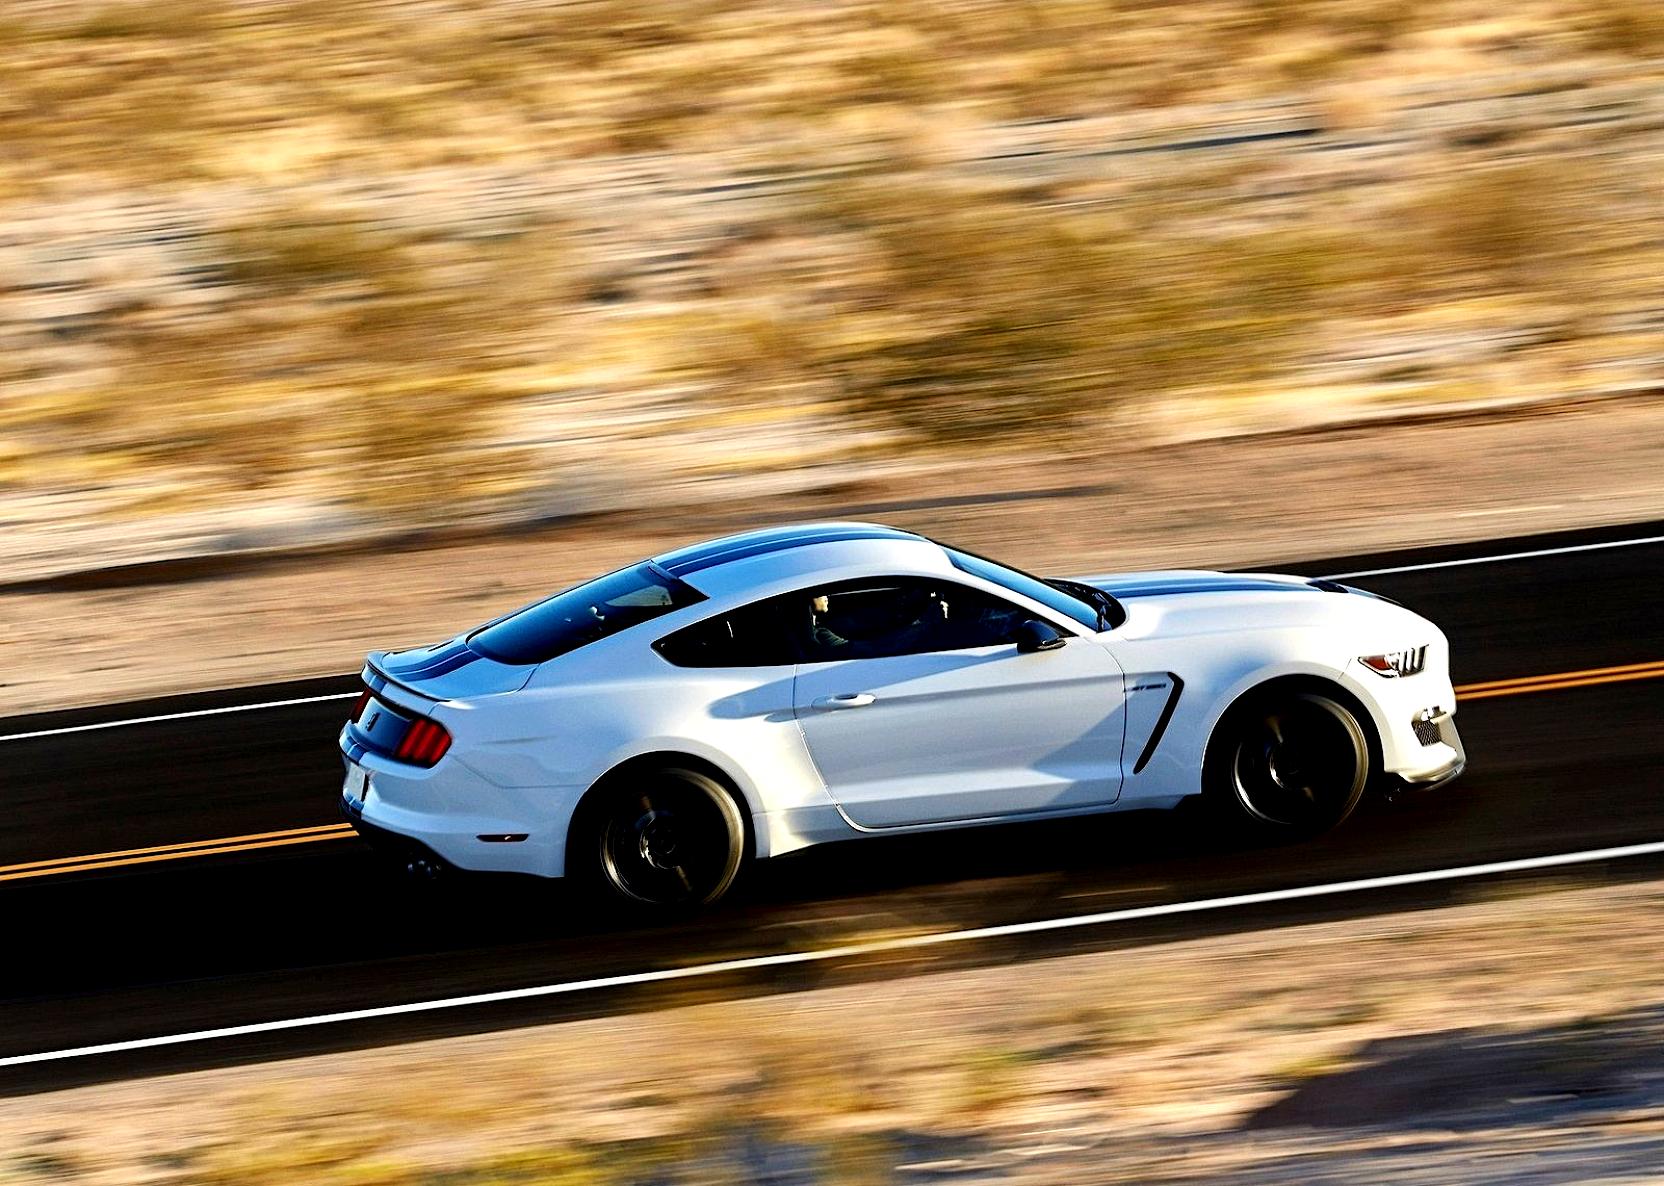 Ford Mustang Shelby GT350 2015 #19